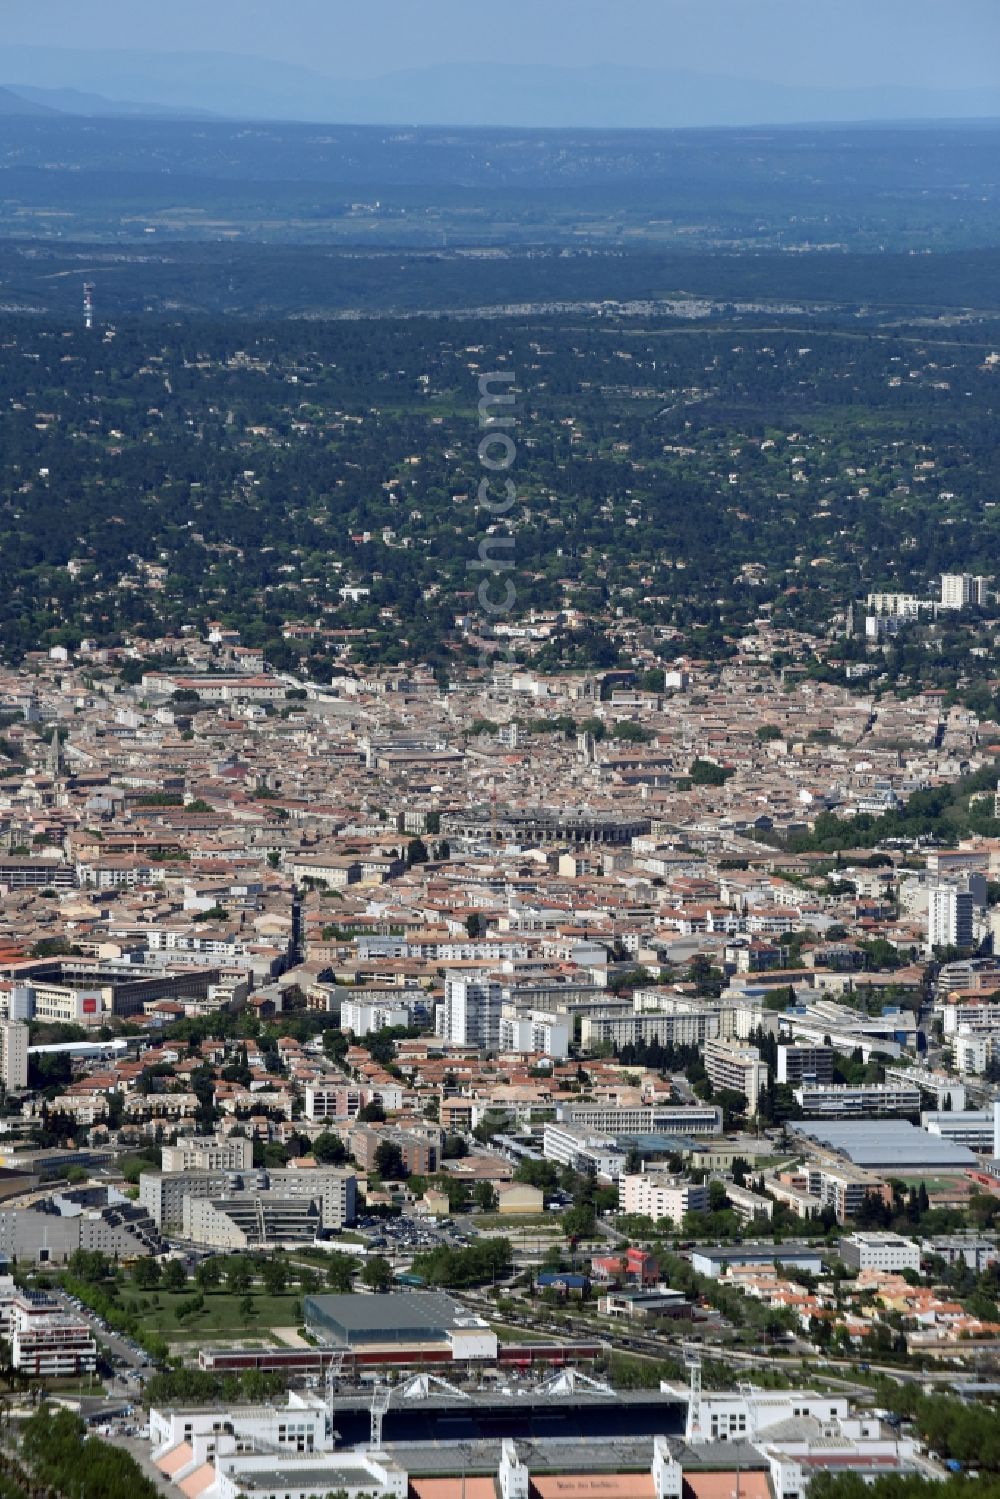 Aerial image Nîmes - City view of the city area of in Nimes in Languedoc-Roussillon Midi-Pyrenees, France